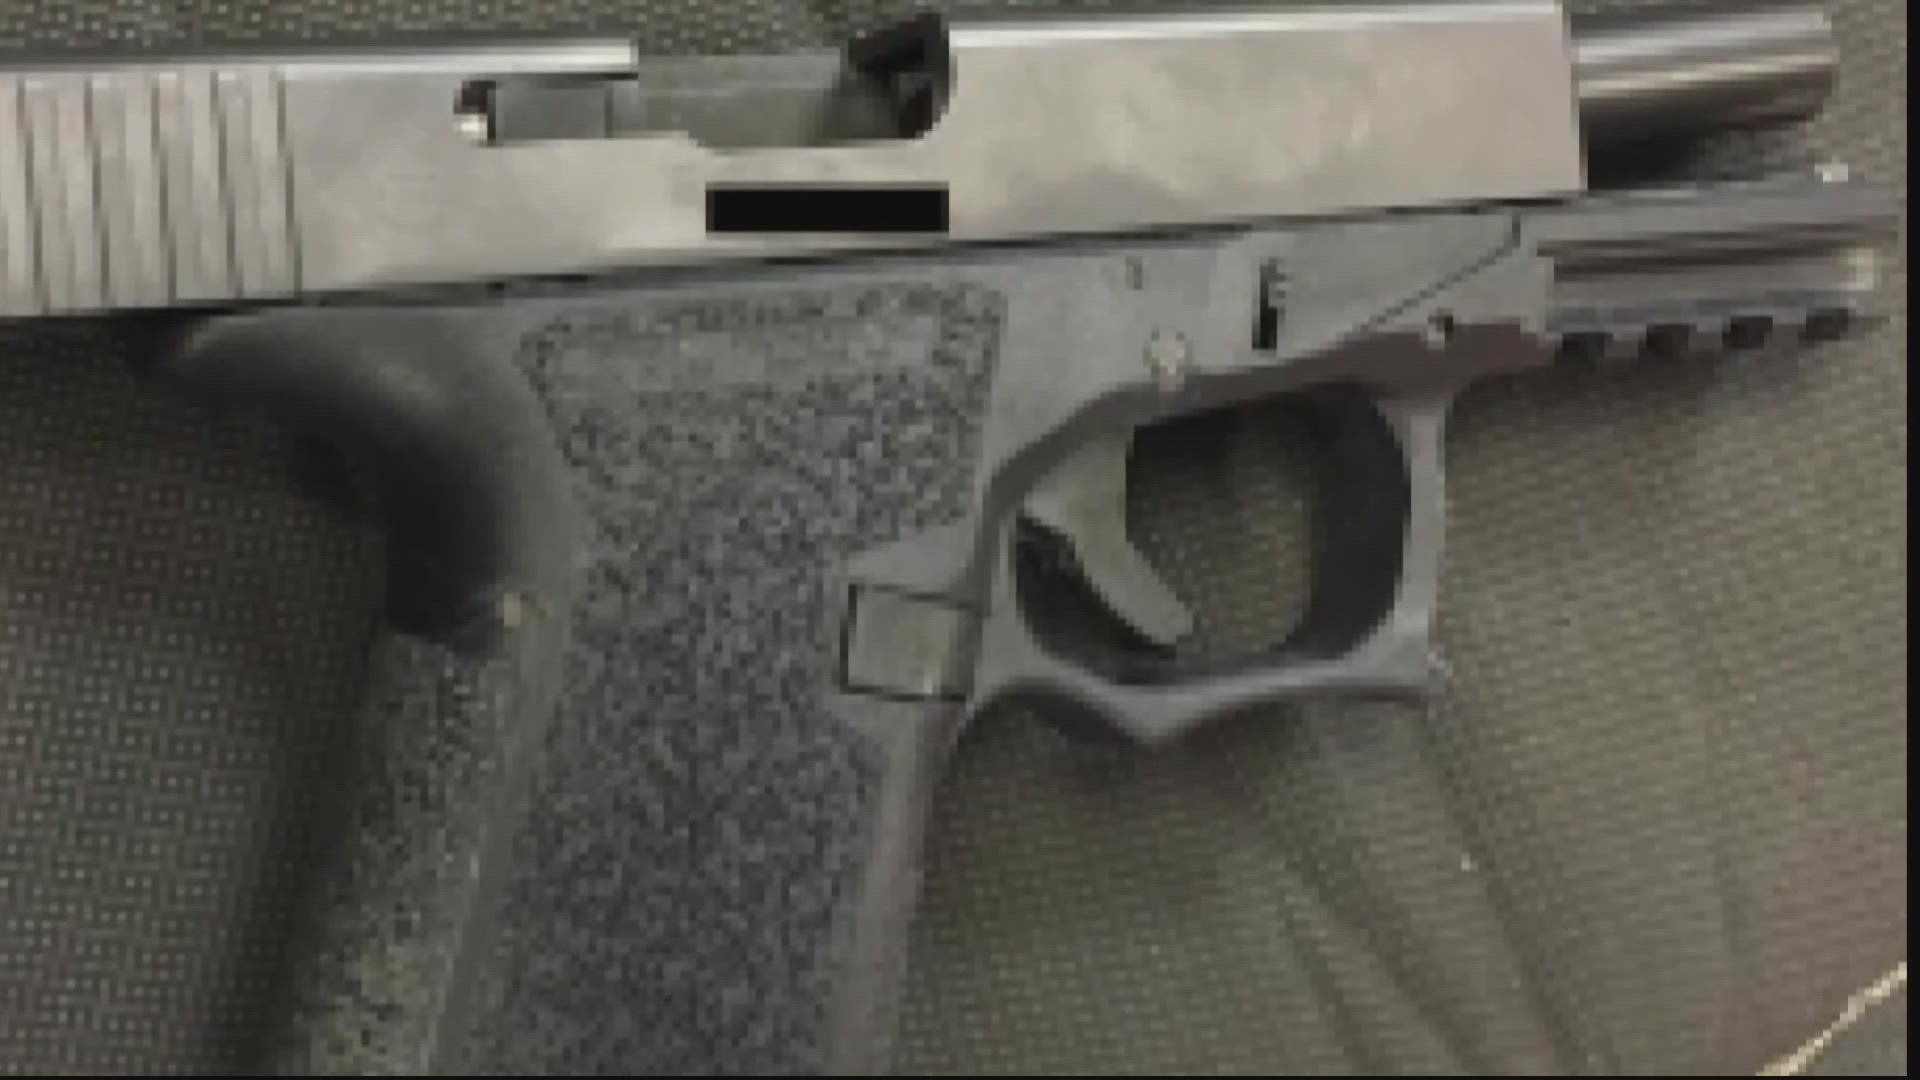 A 17-year-old student is facing multiple charges after police say he brought a ghost gun to his high school on Monday.